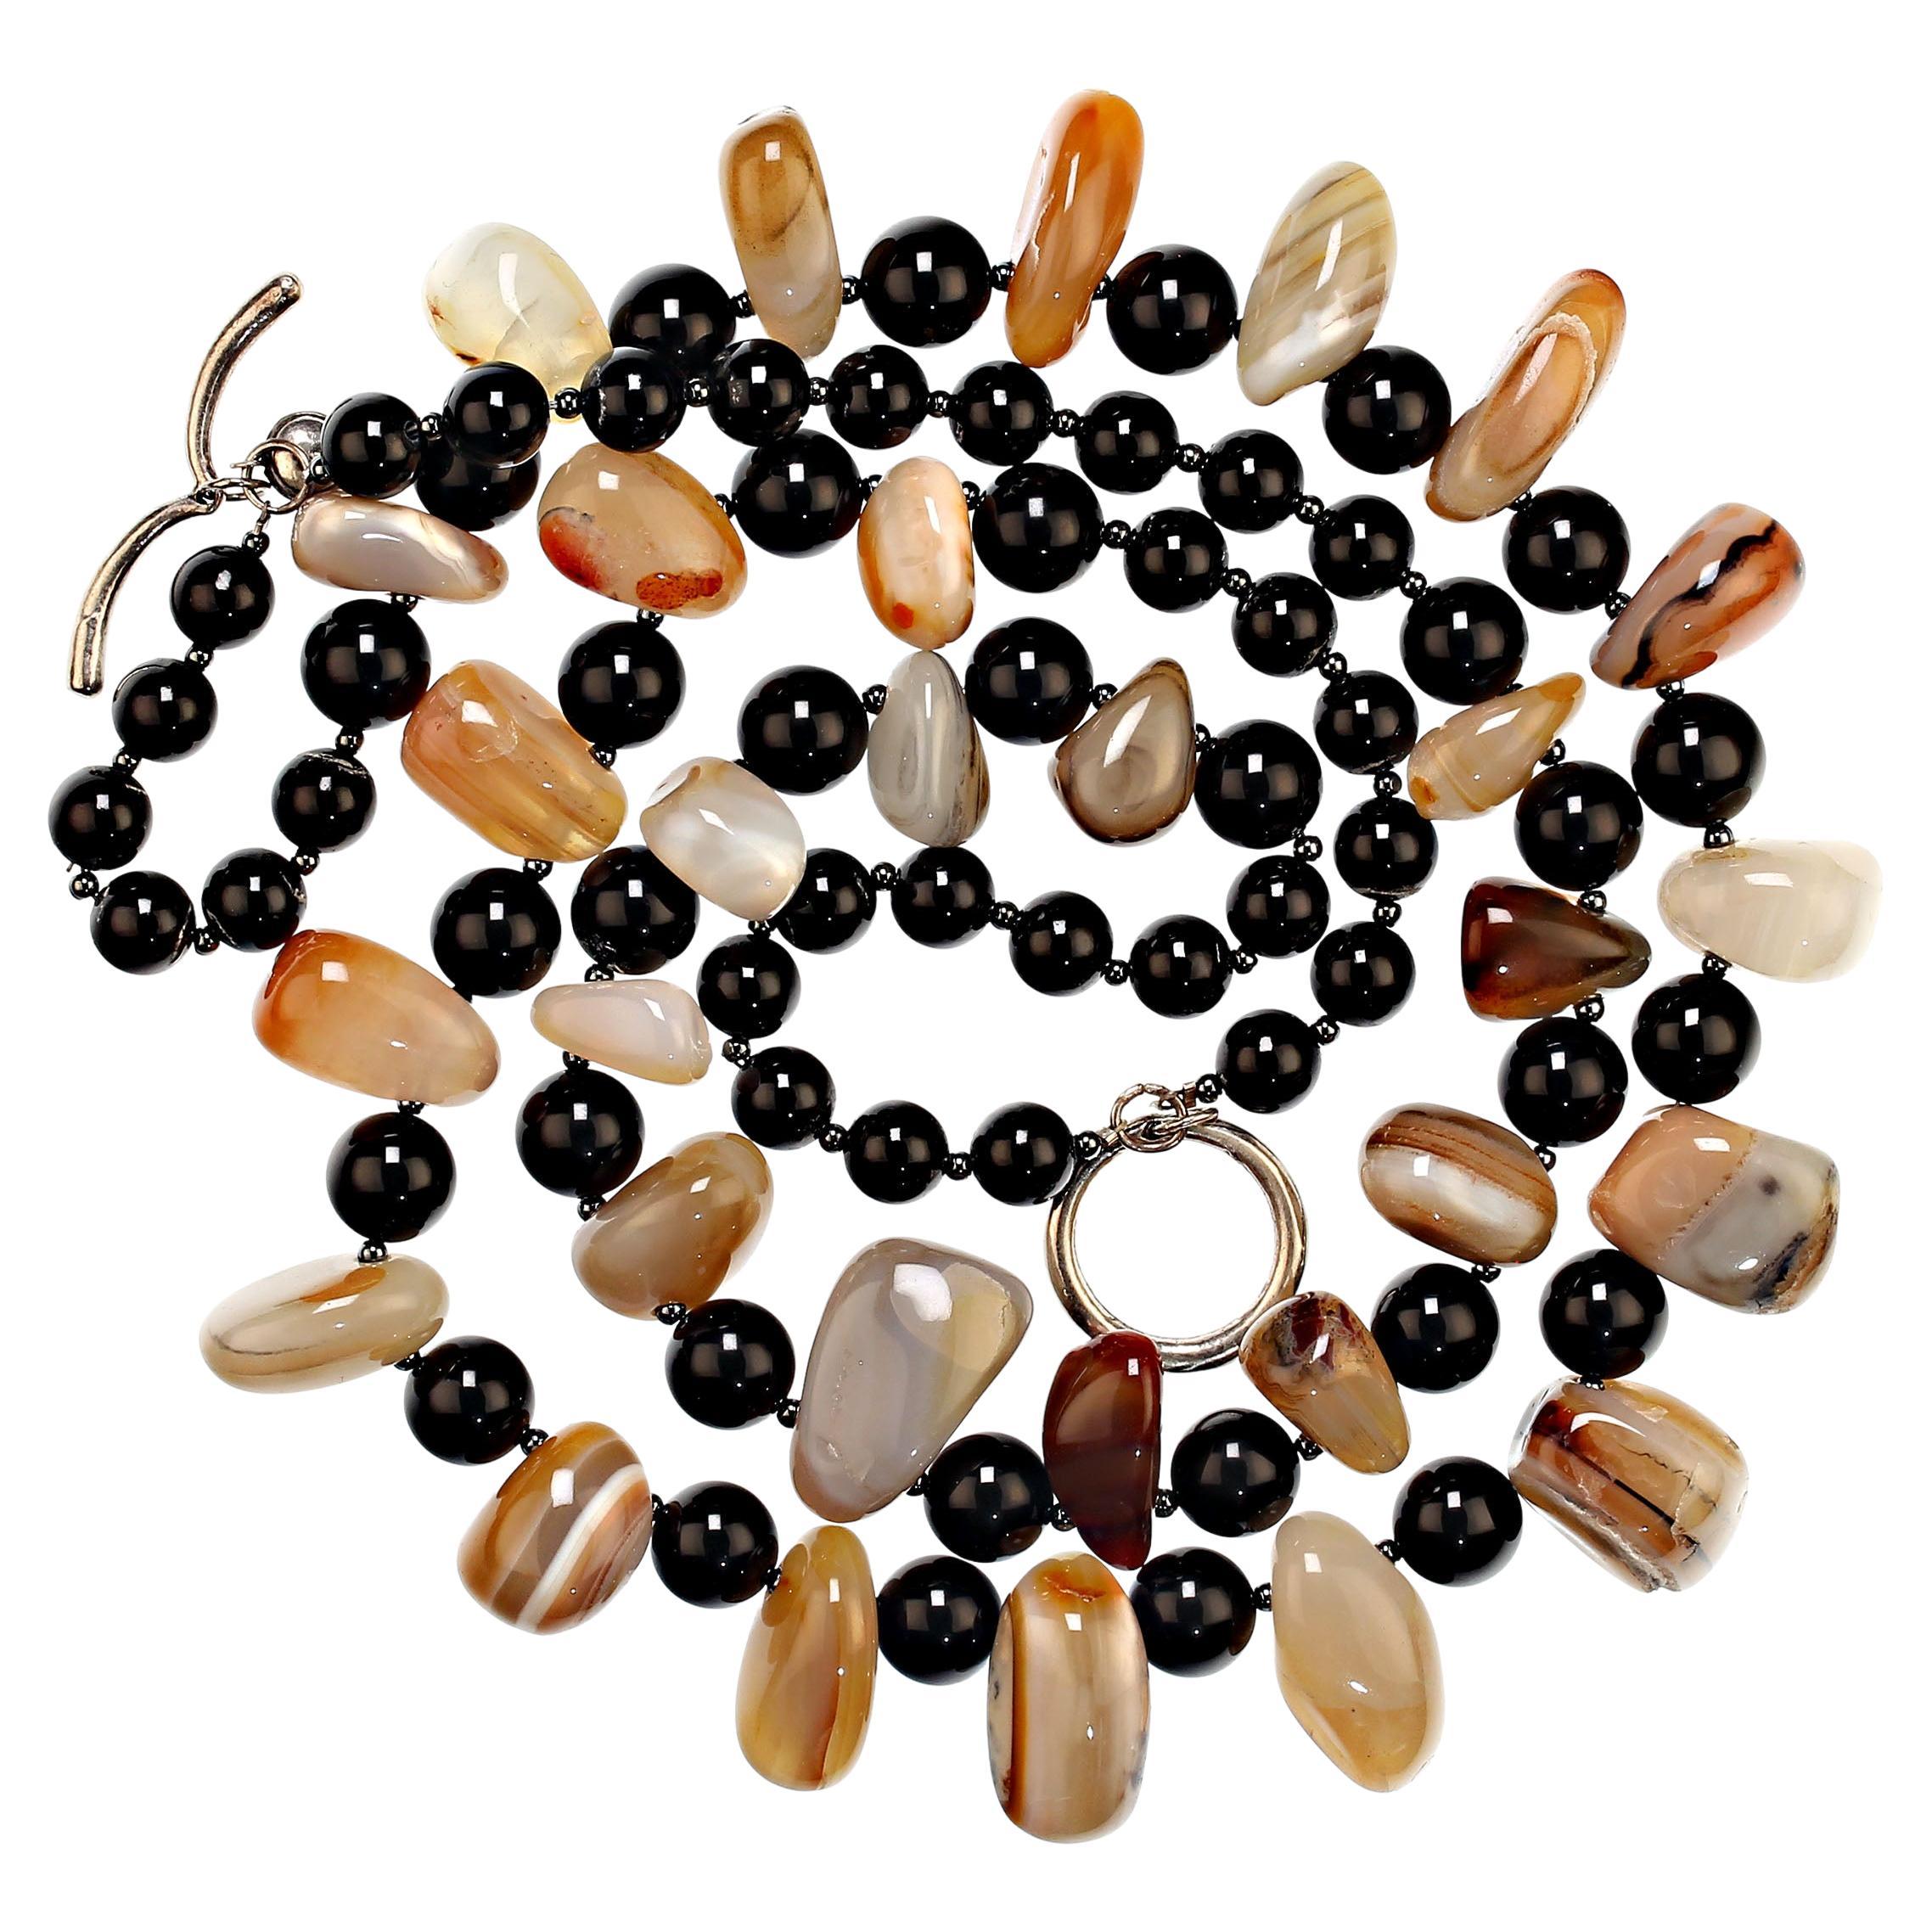 Stunning Botswana Agate Nugget and Black Onyx two strand necklace. The two strands are 17 and 21 inches in length and are secured with a large easy to use silver toggle clasp. Botswana agate is so beautiful and comes only from the country of